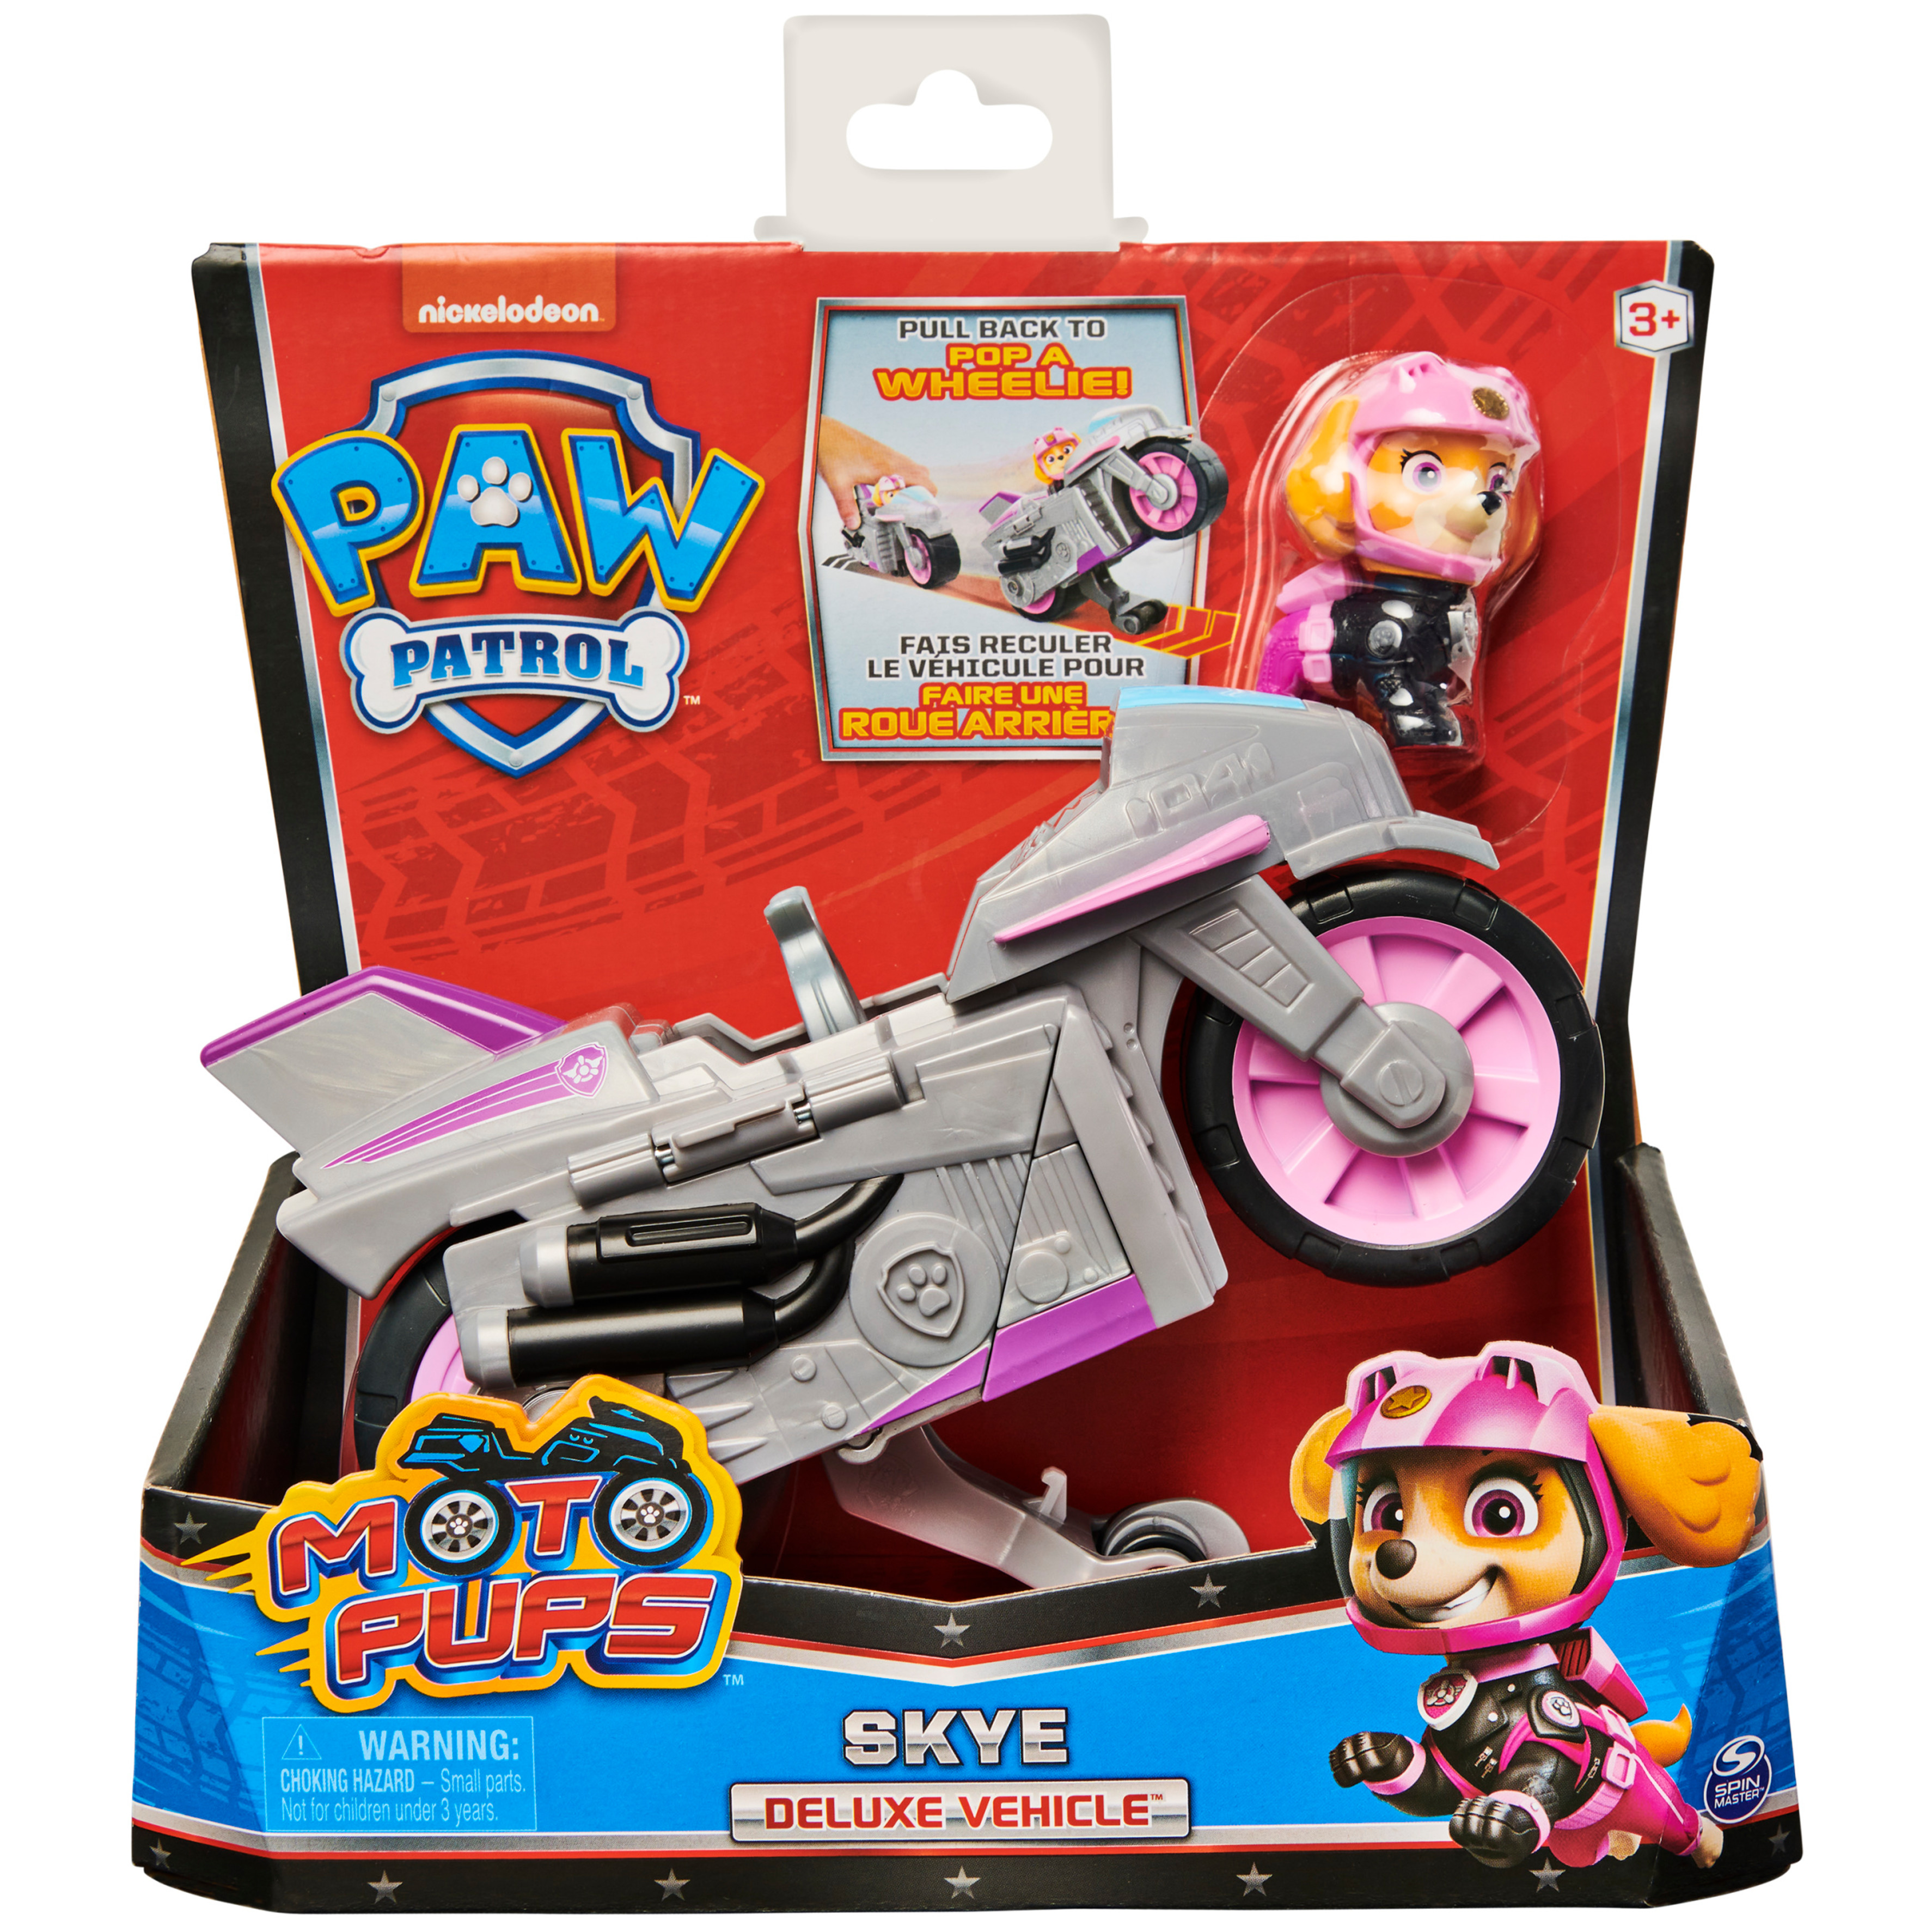 PAW Patrol, Moto Pups Skye’s Deluxe Pull Back Motorcycle Vehicle with Wheelie Feature and Figure - image 2 of 7